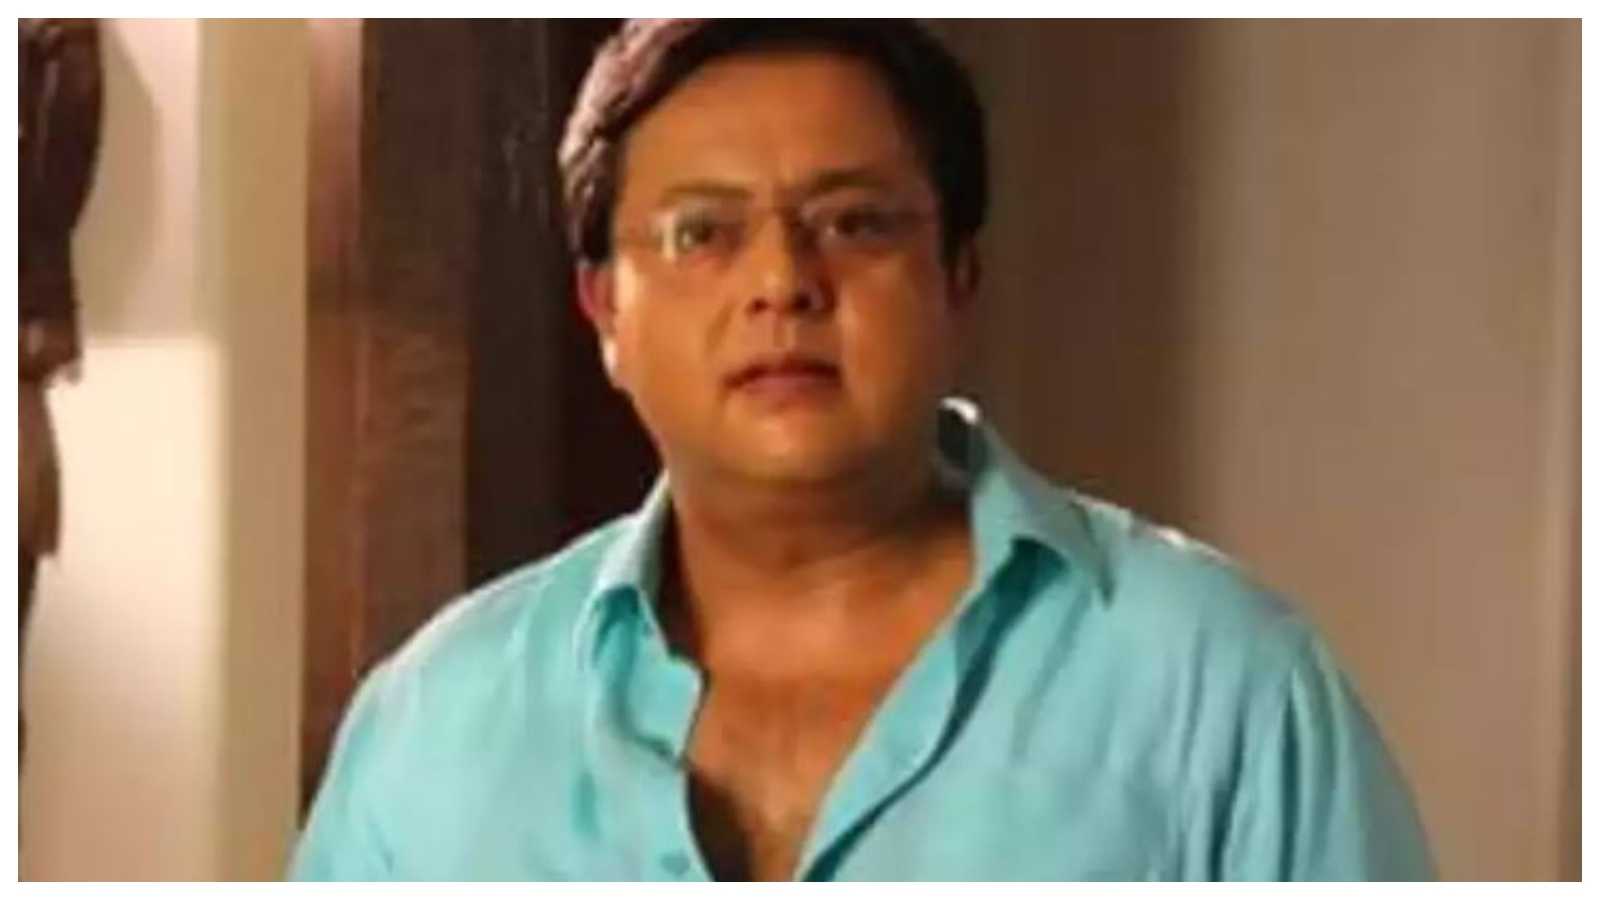 Anupamaa actor Nitesh Pandey found dead at hotel in Nashik, celebs mourn his demise